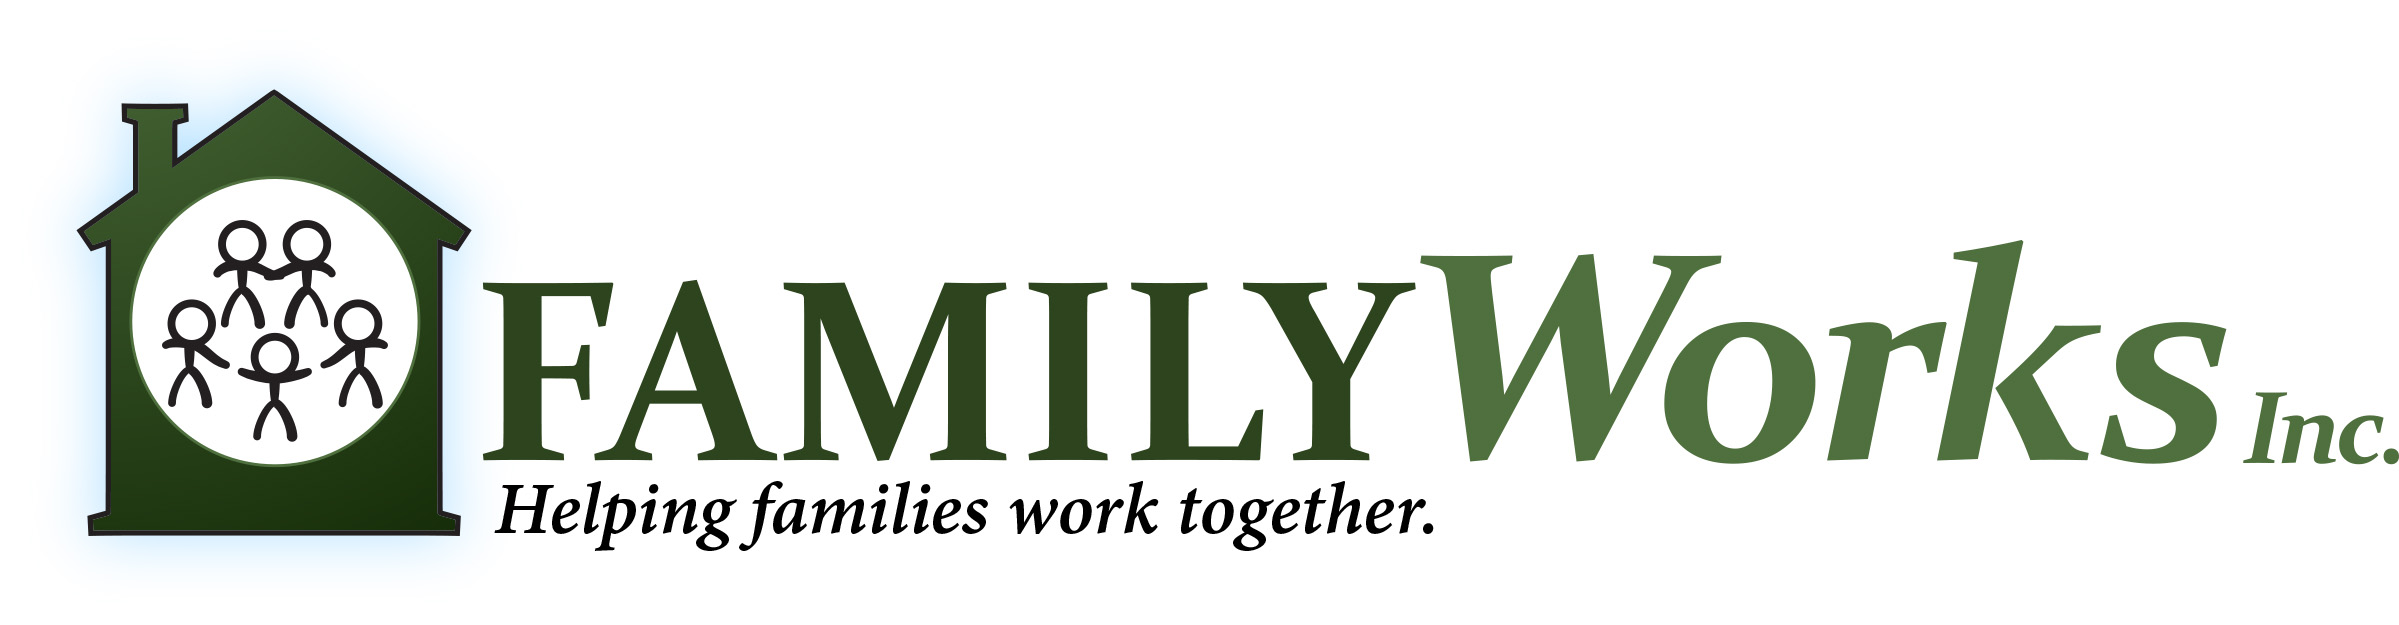 Family Works, Inc